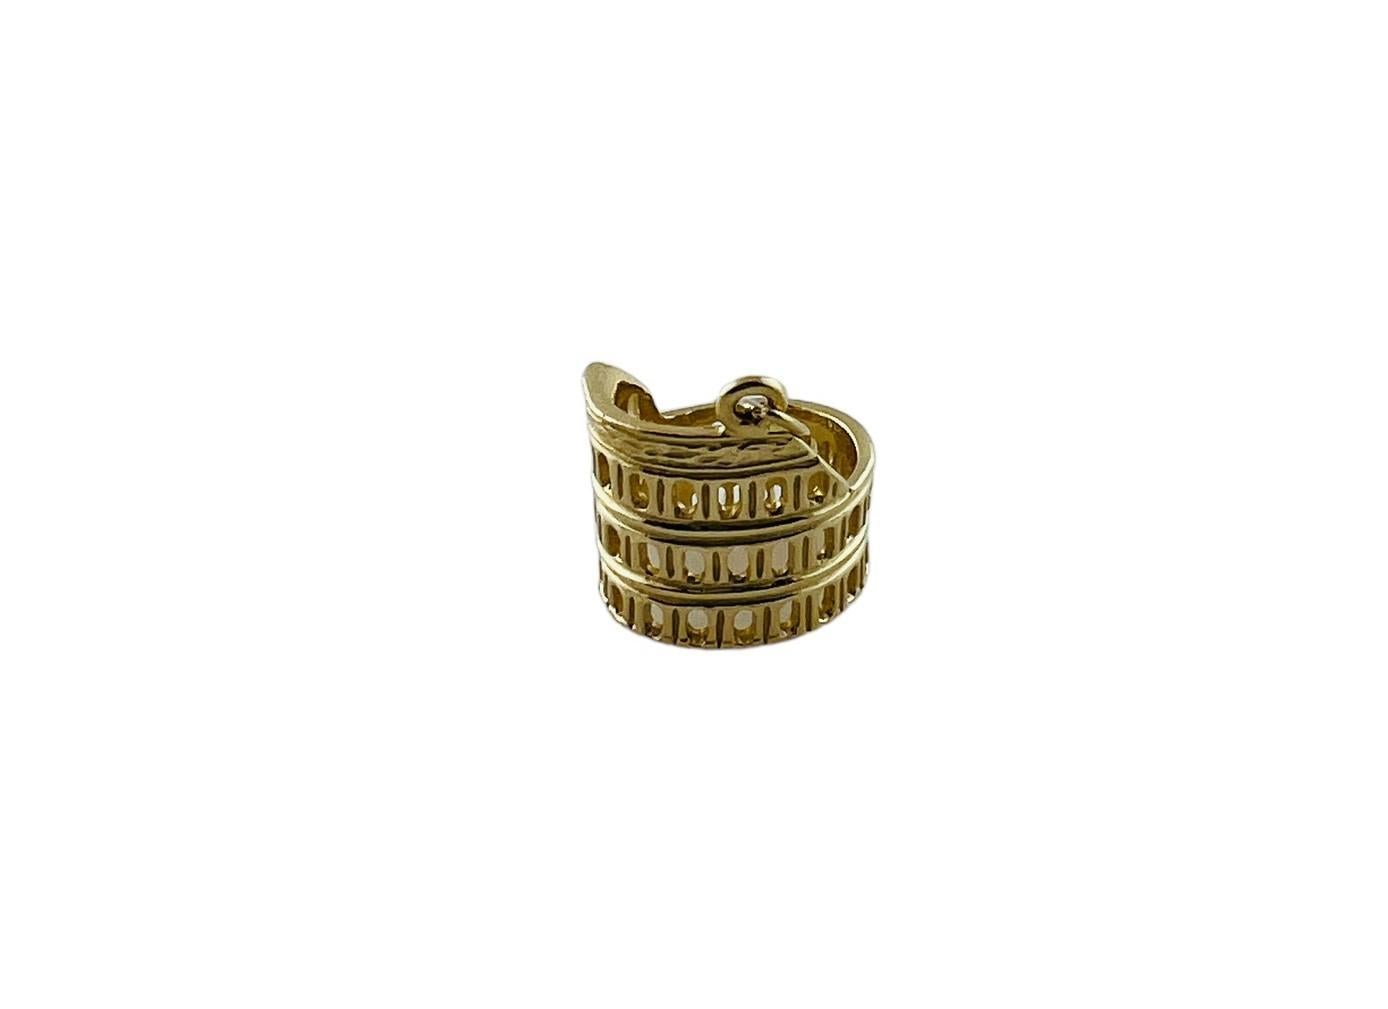 14K Yellow Gold  Colosseum Charm

This open colosseum charm is set in 14K yellow gold

Charm measures approx. 11.8mm x 13.3mm x 10.0 mm

2.3 grams / 1.4 dwt

Stamped 14K

*Does not come with chain*

Very good preowned condition. 

Will be shipped